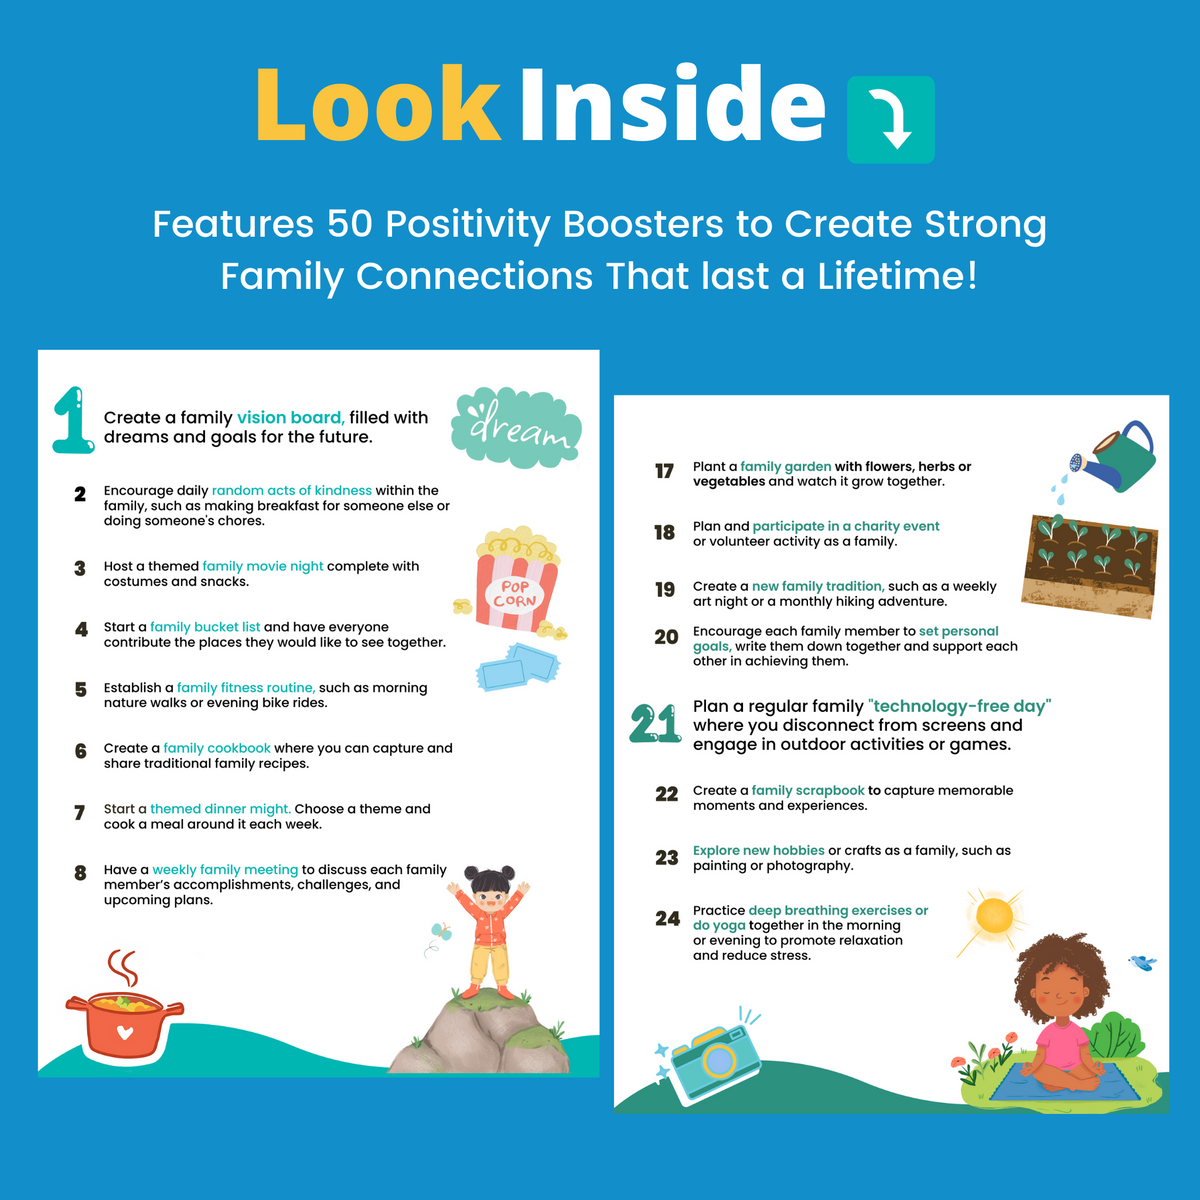 50 Positivity Boosters For Families (PDF)